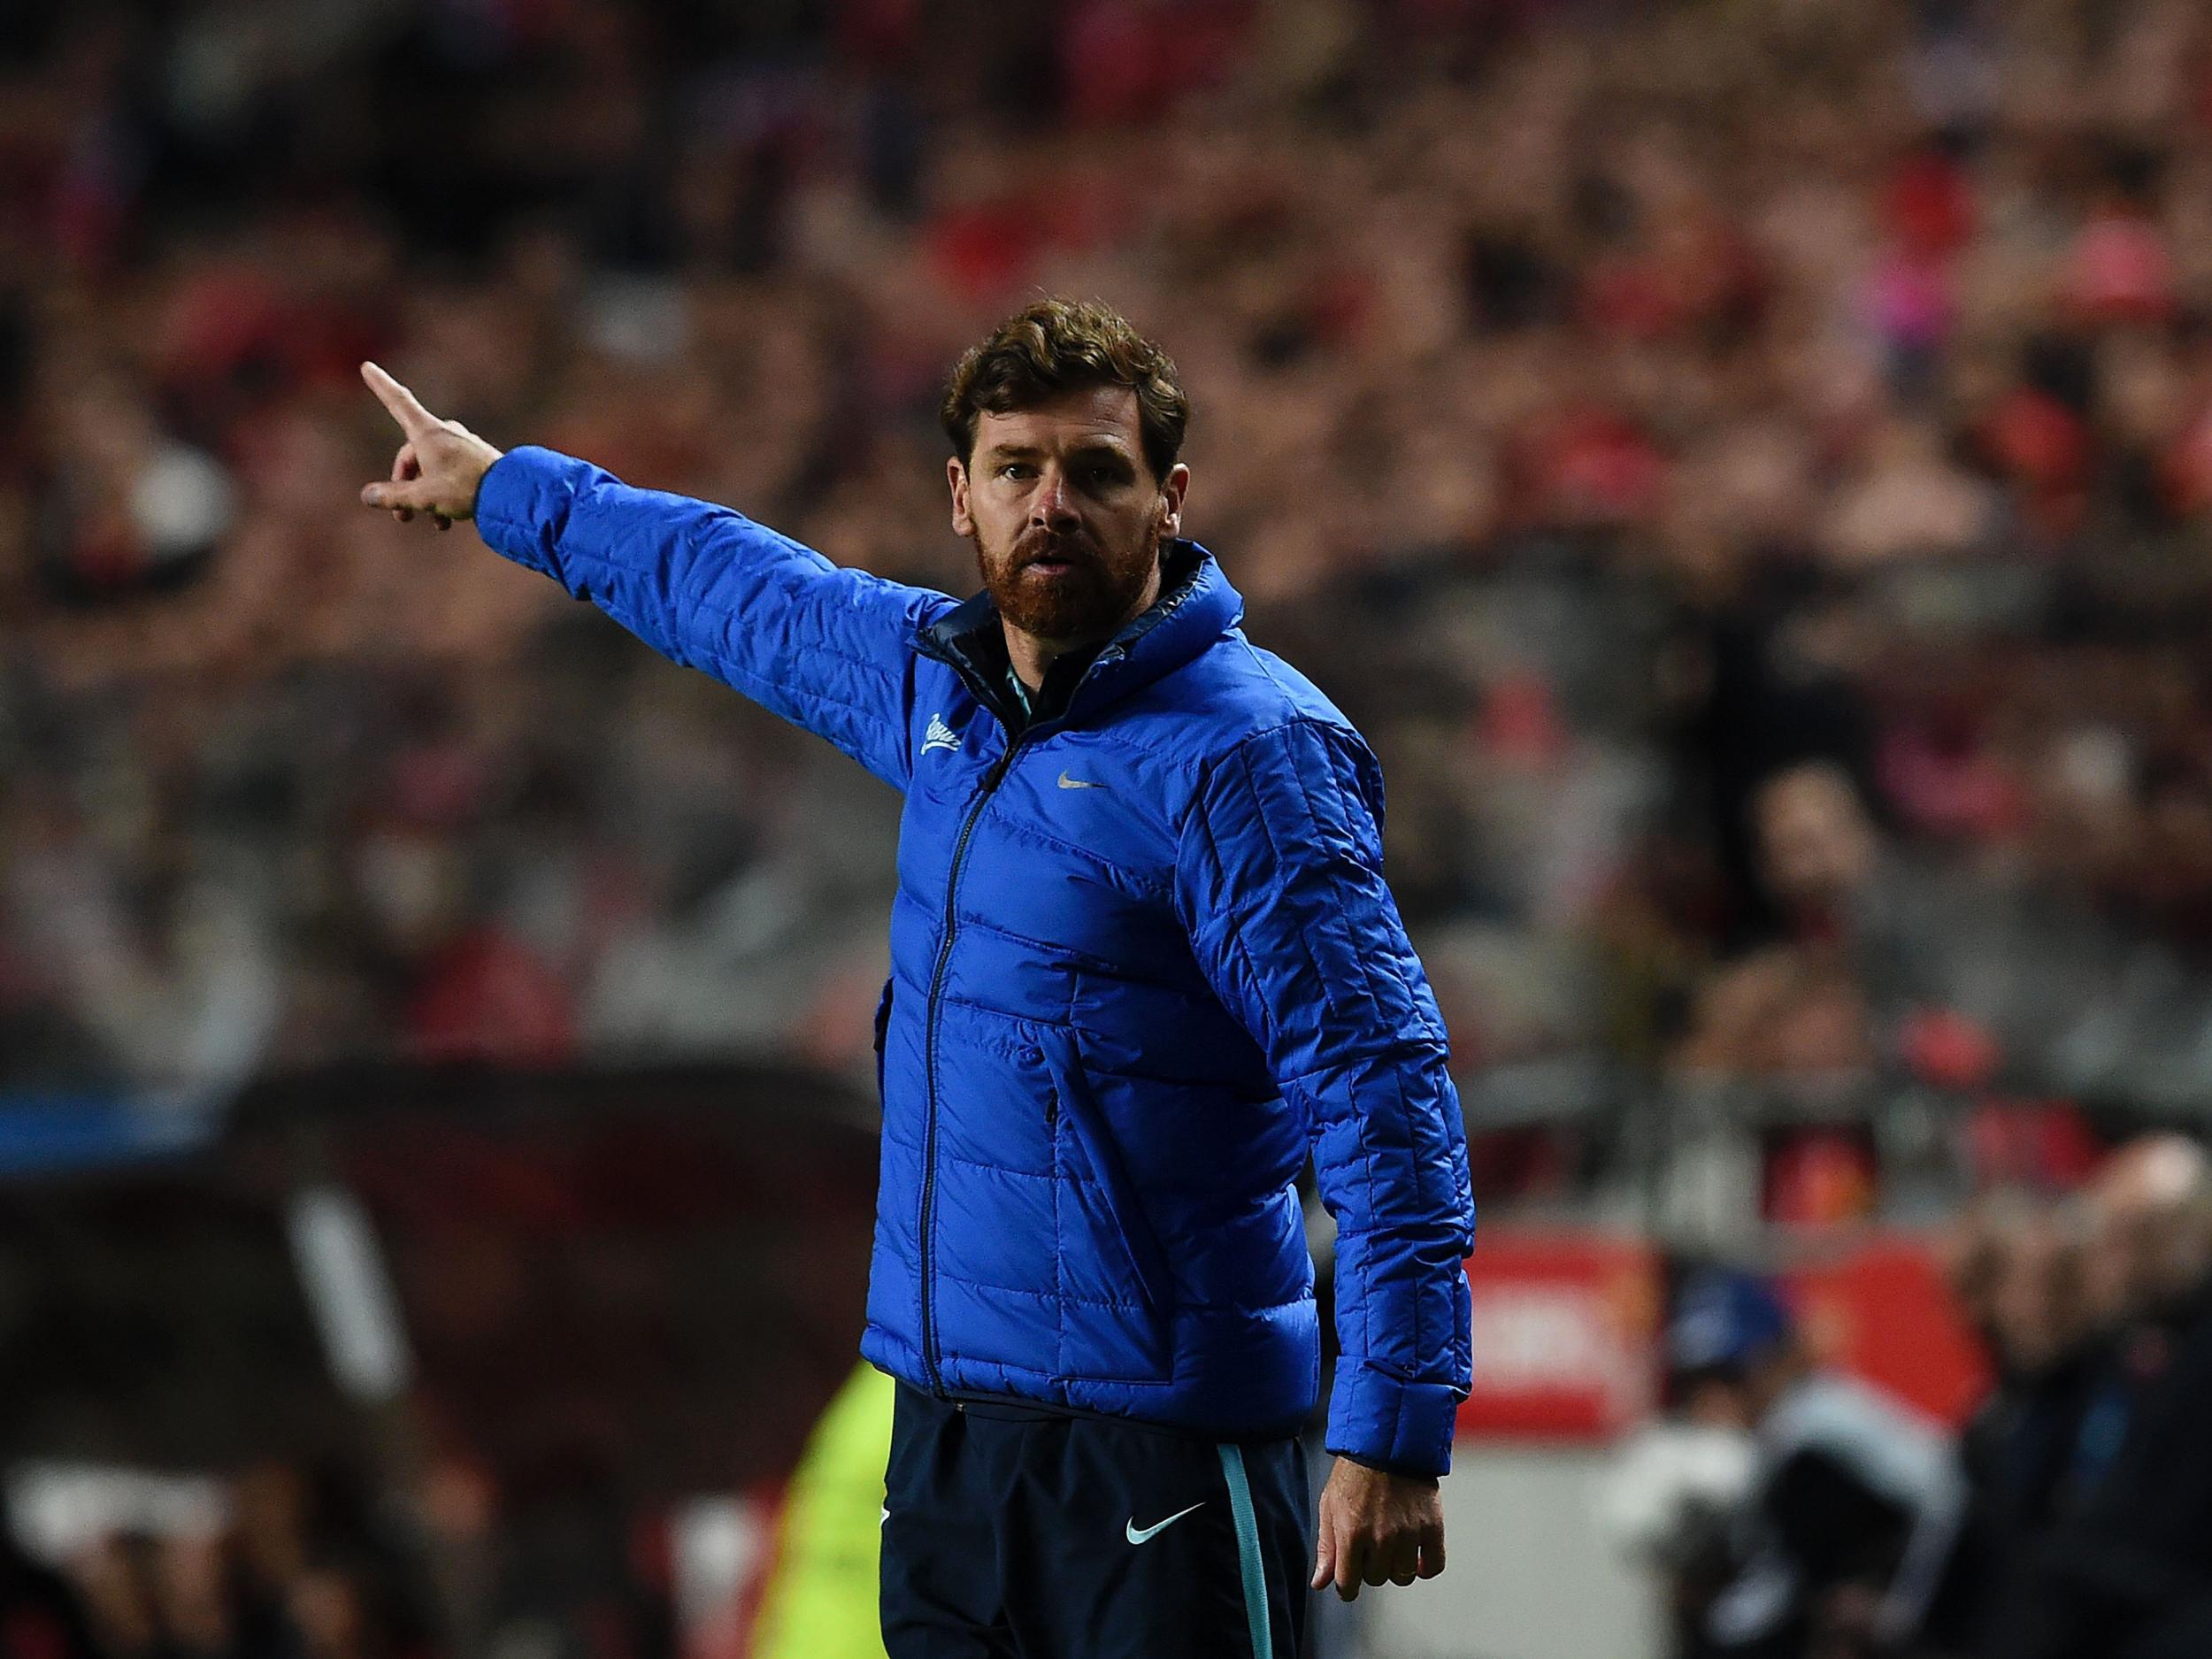 Andre Villas-Boas on the sidelines for Zenit